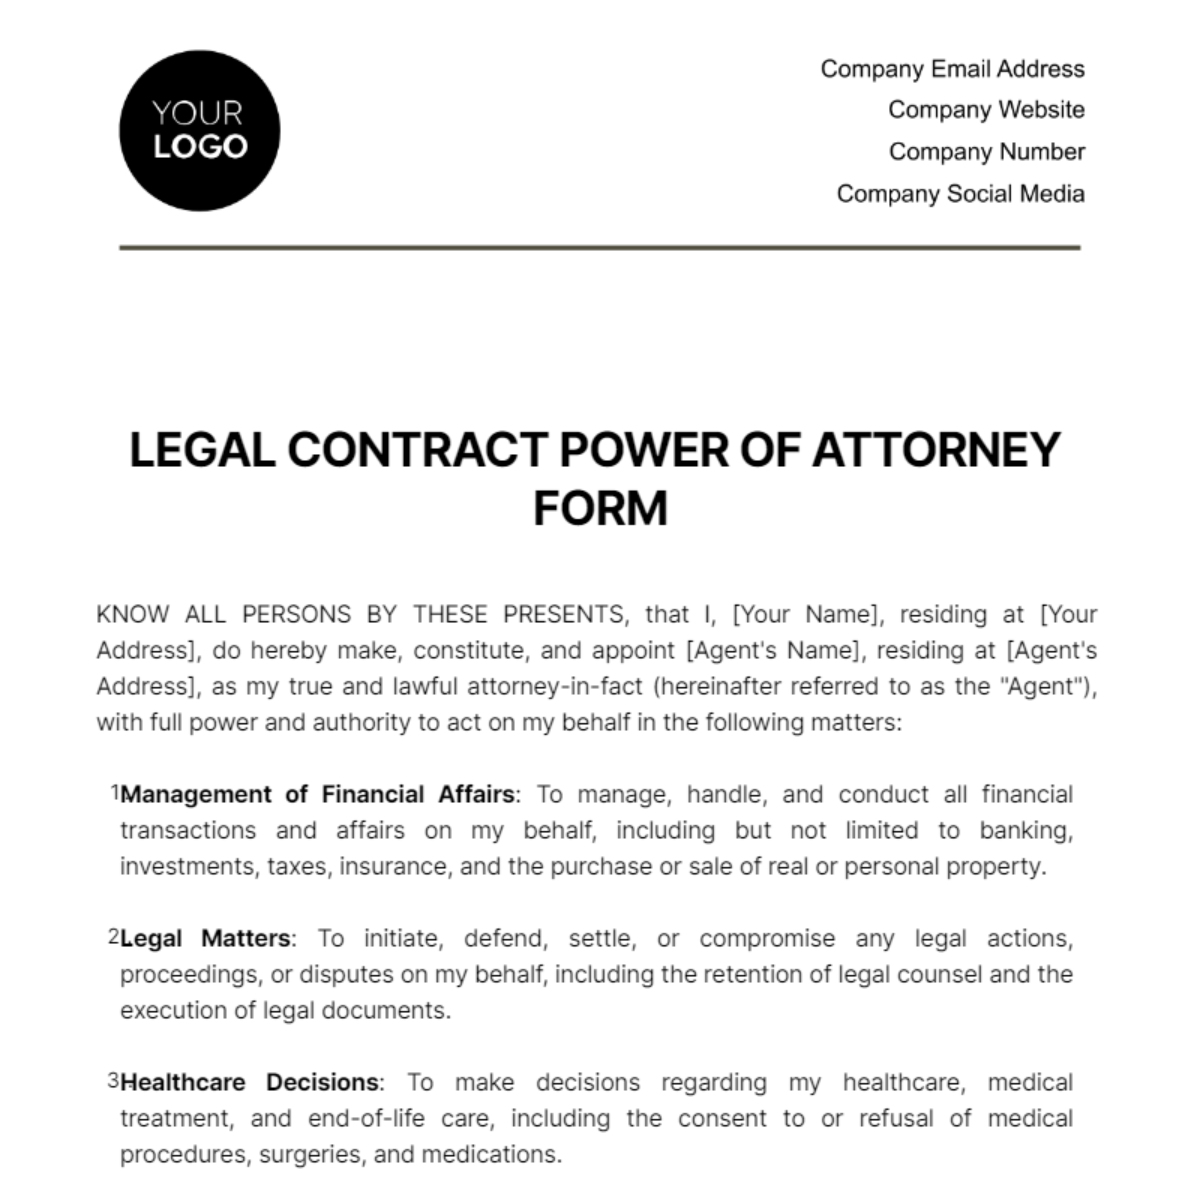 Legal Contract Power of Attorney Form Template